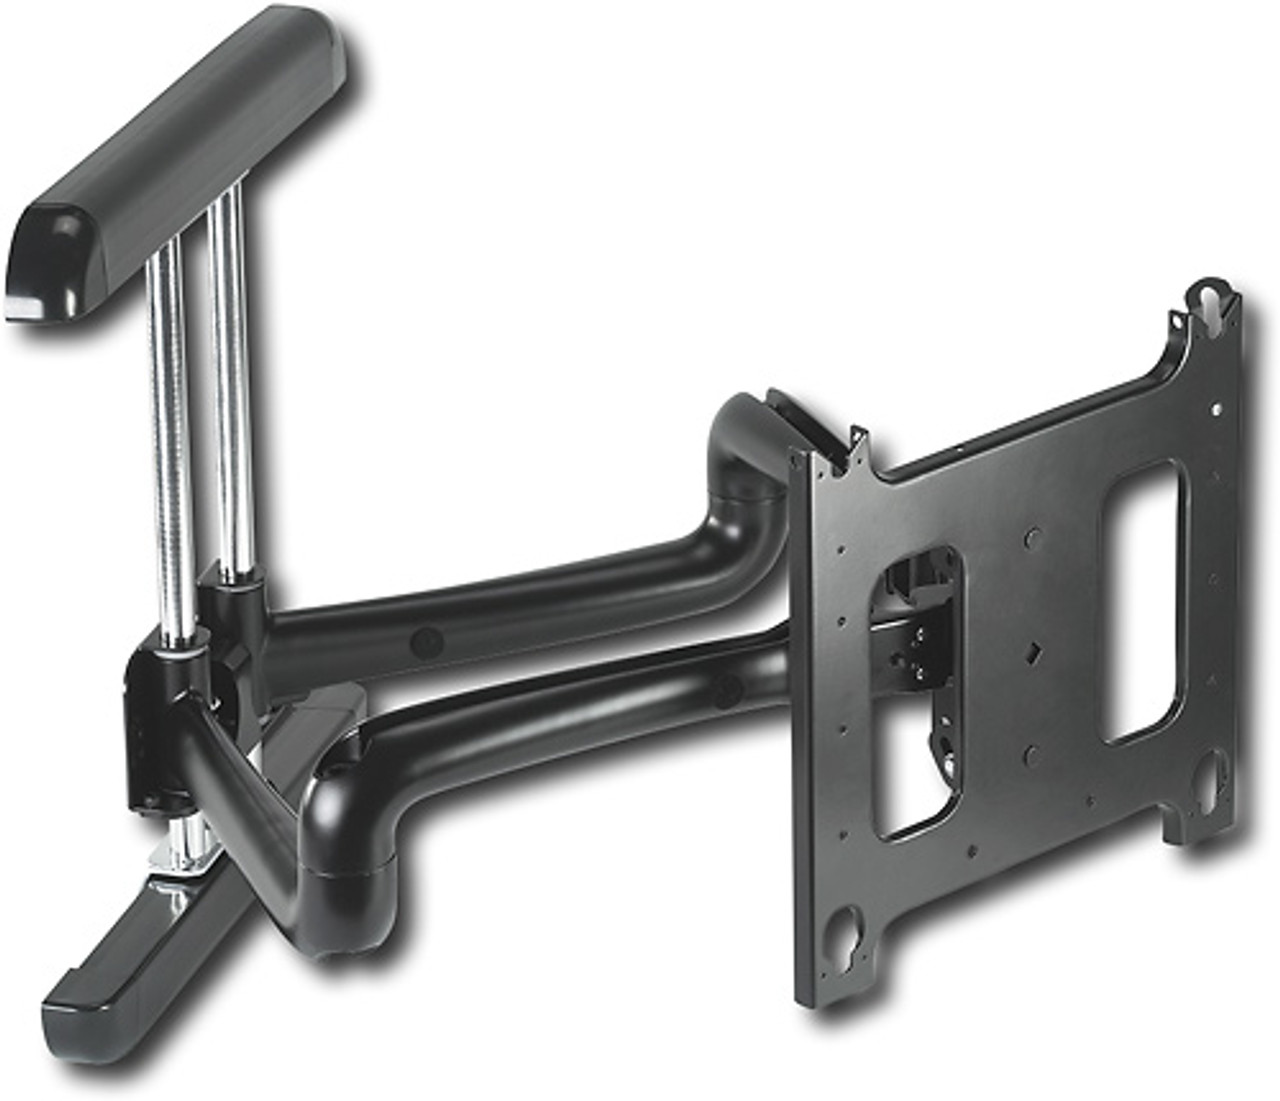 Chief - Reaction Full-Motion TV Wall Mount for 42" - 71" Flat-Panel TVs - Extends 37" - Black